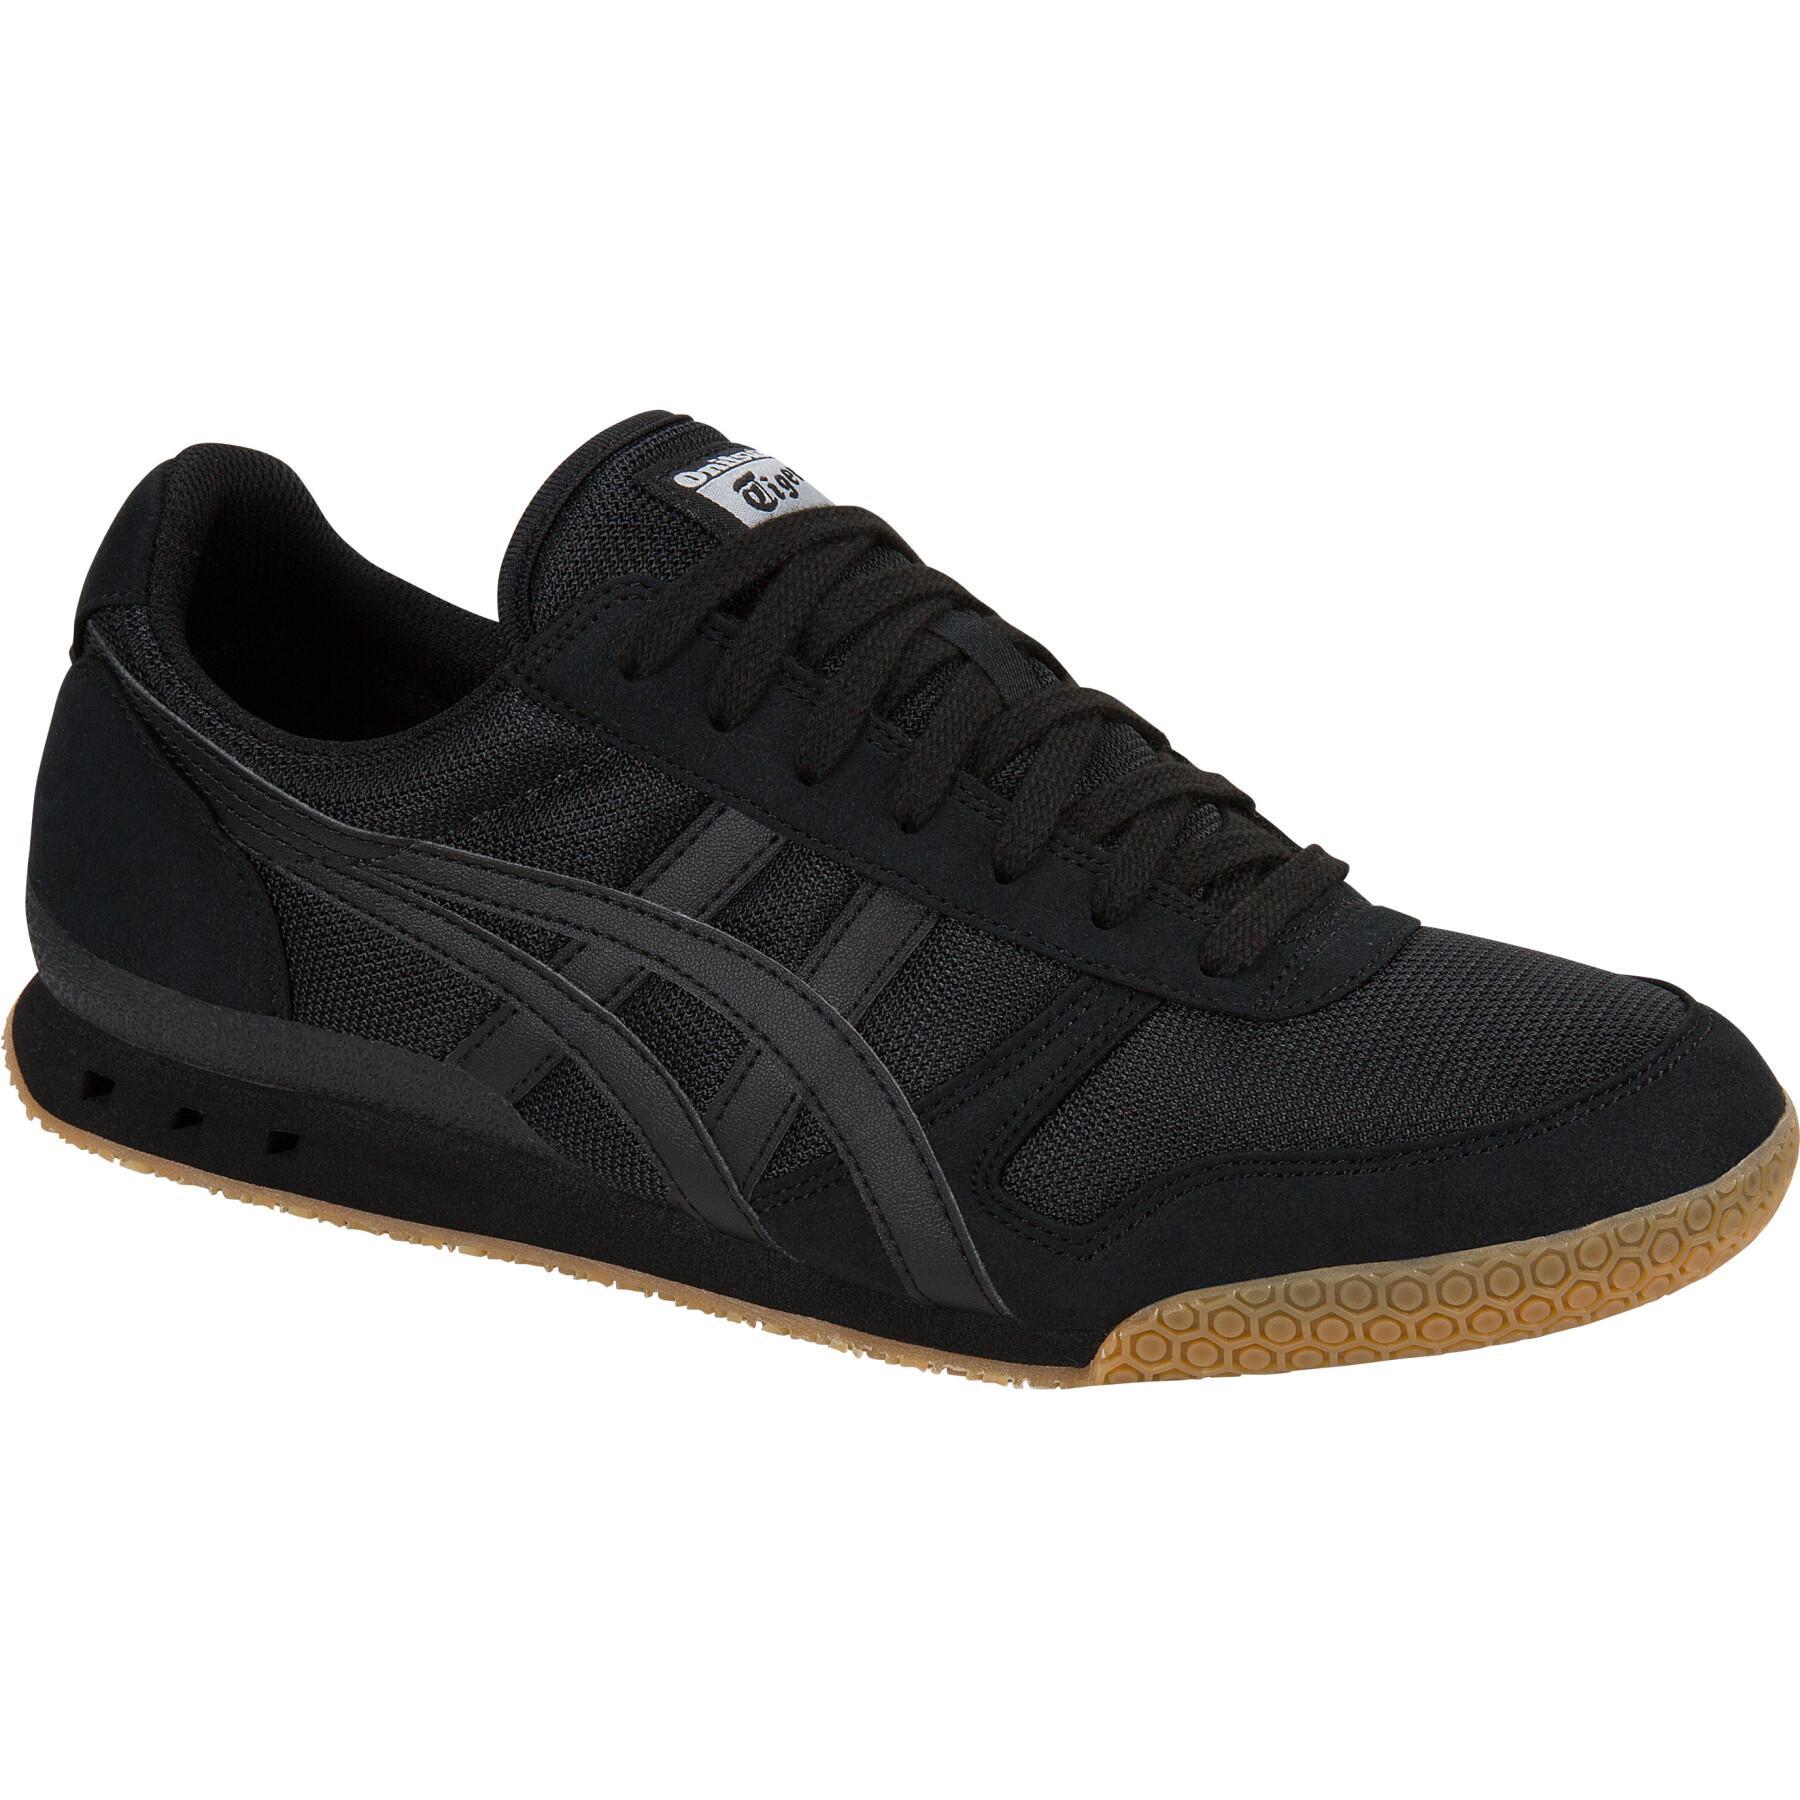 Formadores Onitsuka Tiger Traxy Trainer